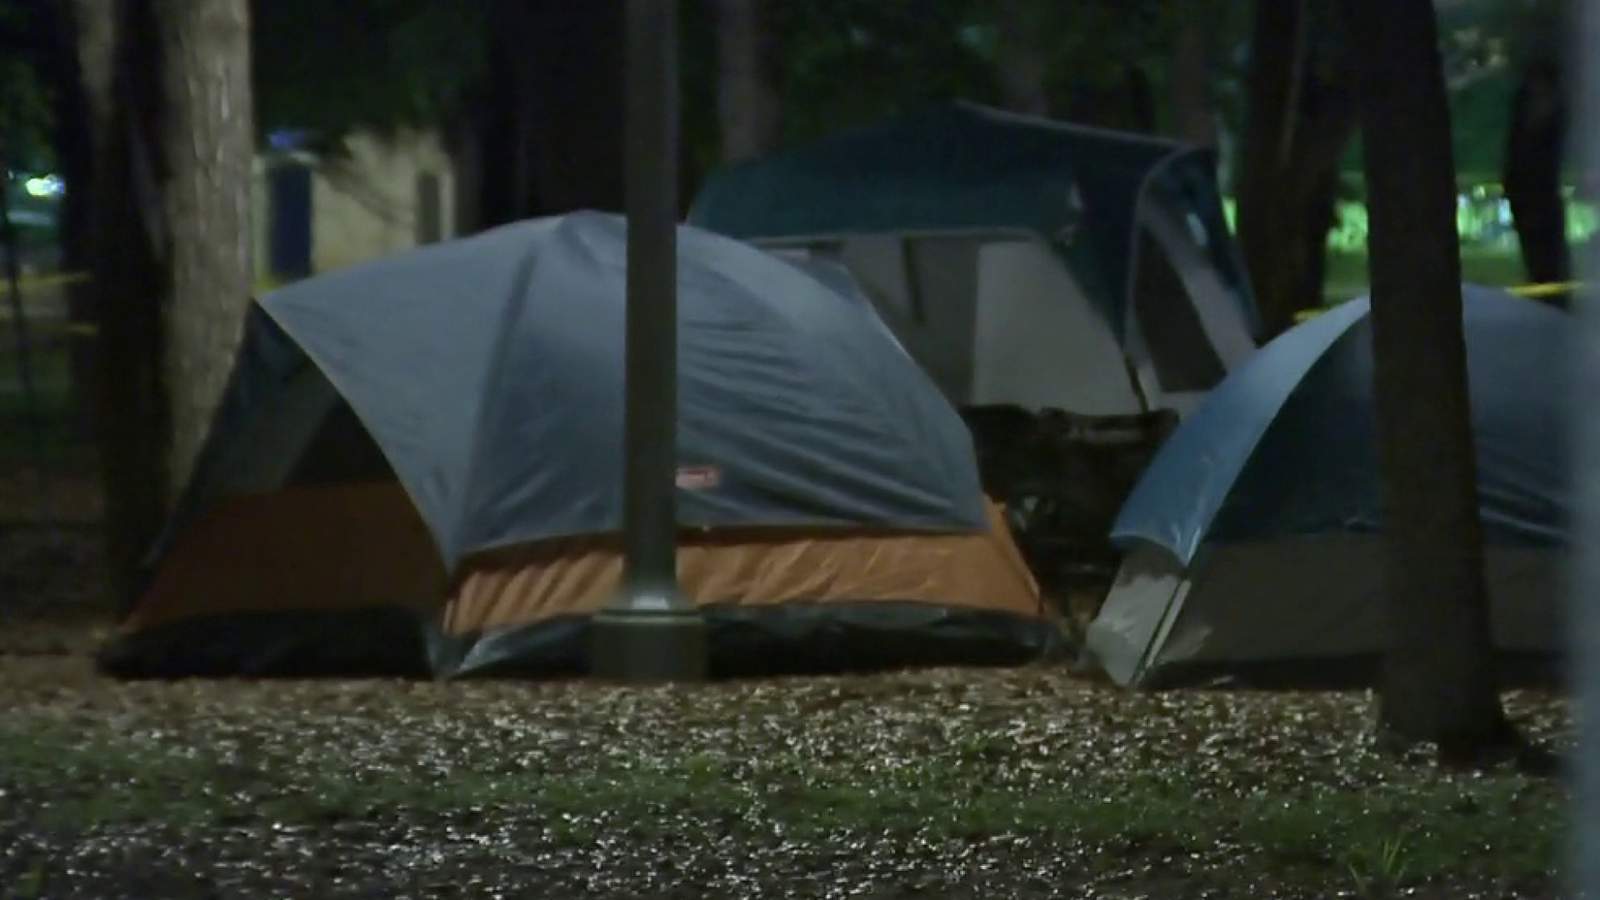 Traditional Easter weekend camping at SA parks prohibited again this year due to COVID-19, mayor says